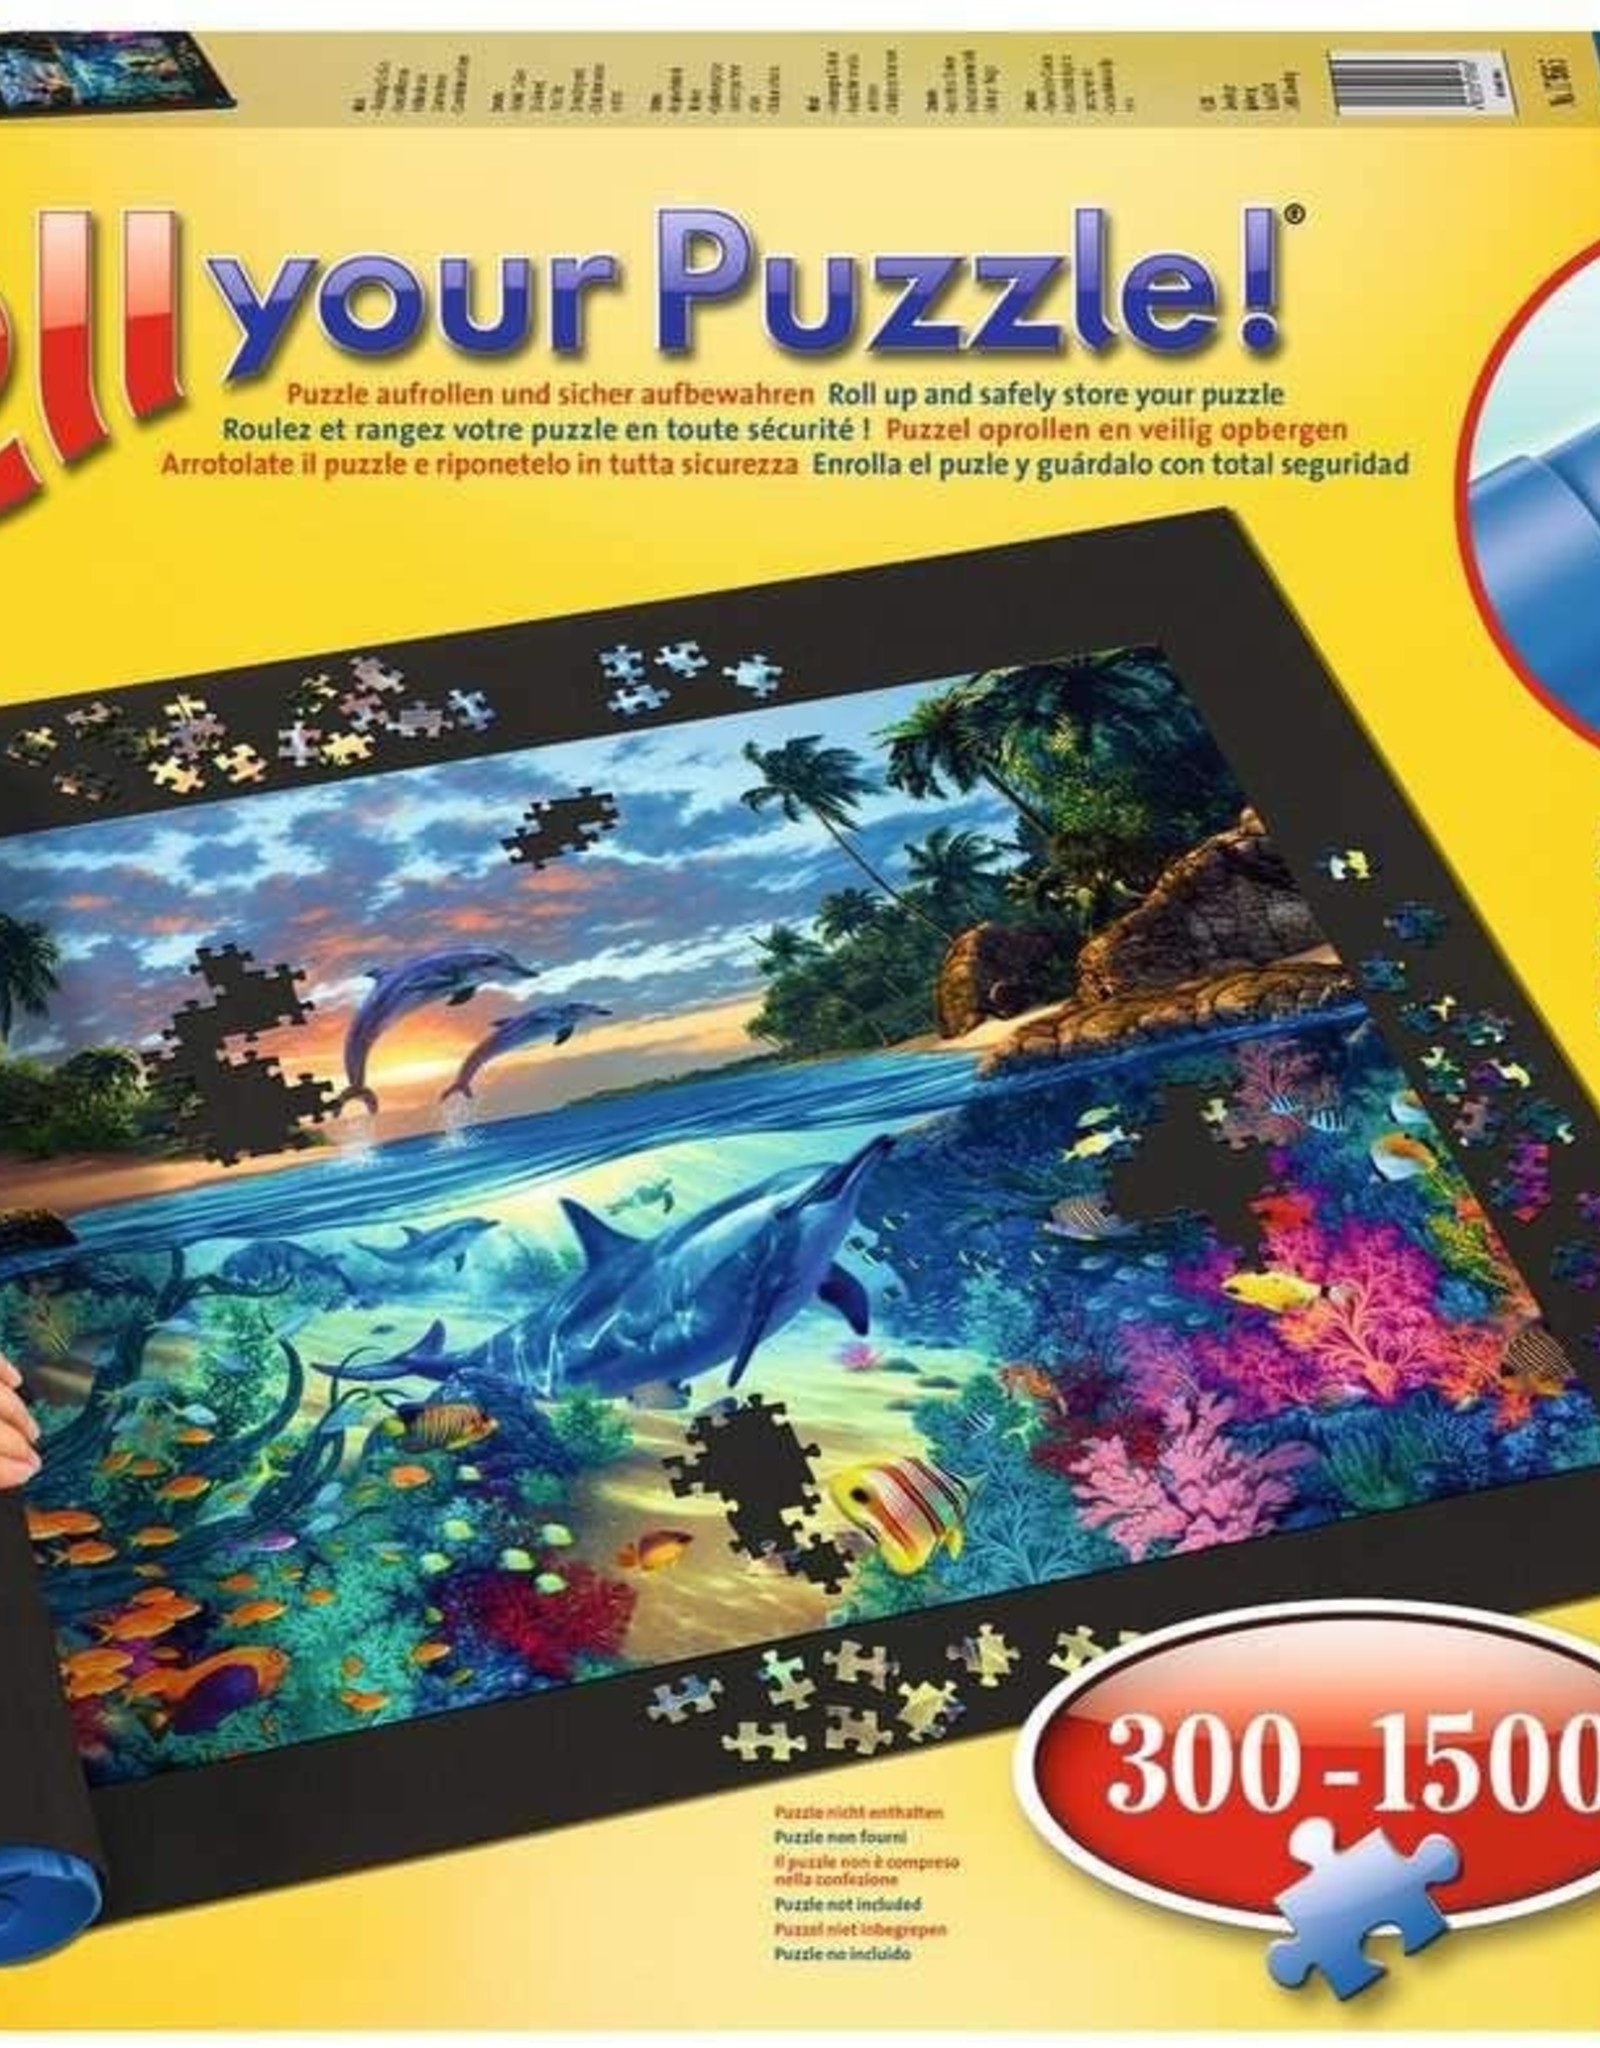 Ravensburger Roll your Puzzle 300-1500p